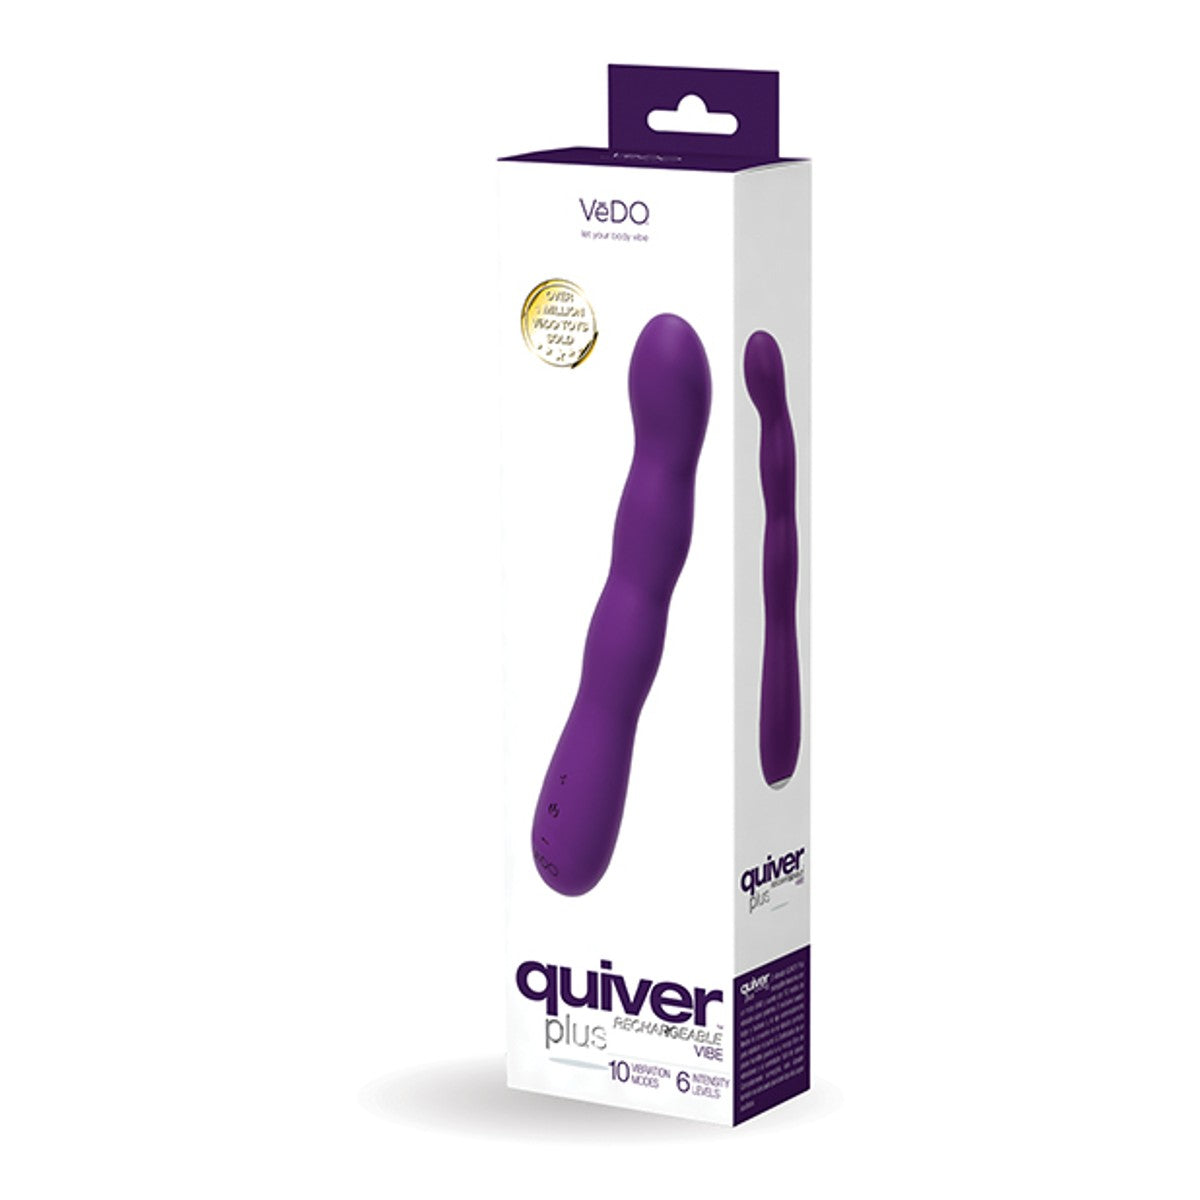 This unique, extremely flexible, and long vibrator with a bulbous head is the perfect toy for targeting the g-spot at just the right angle.